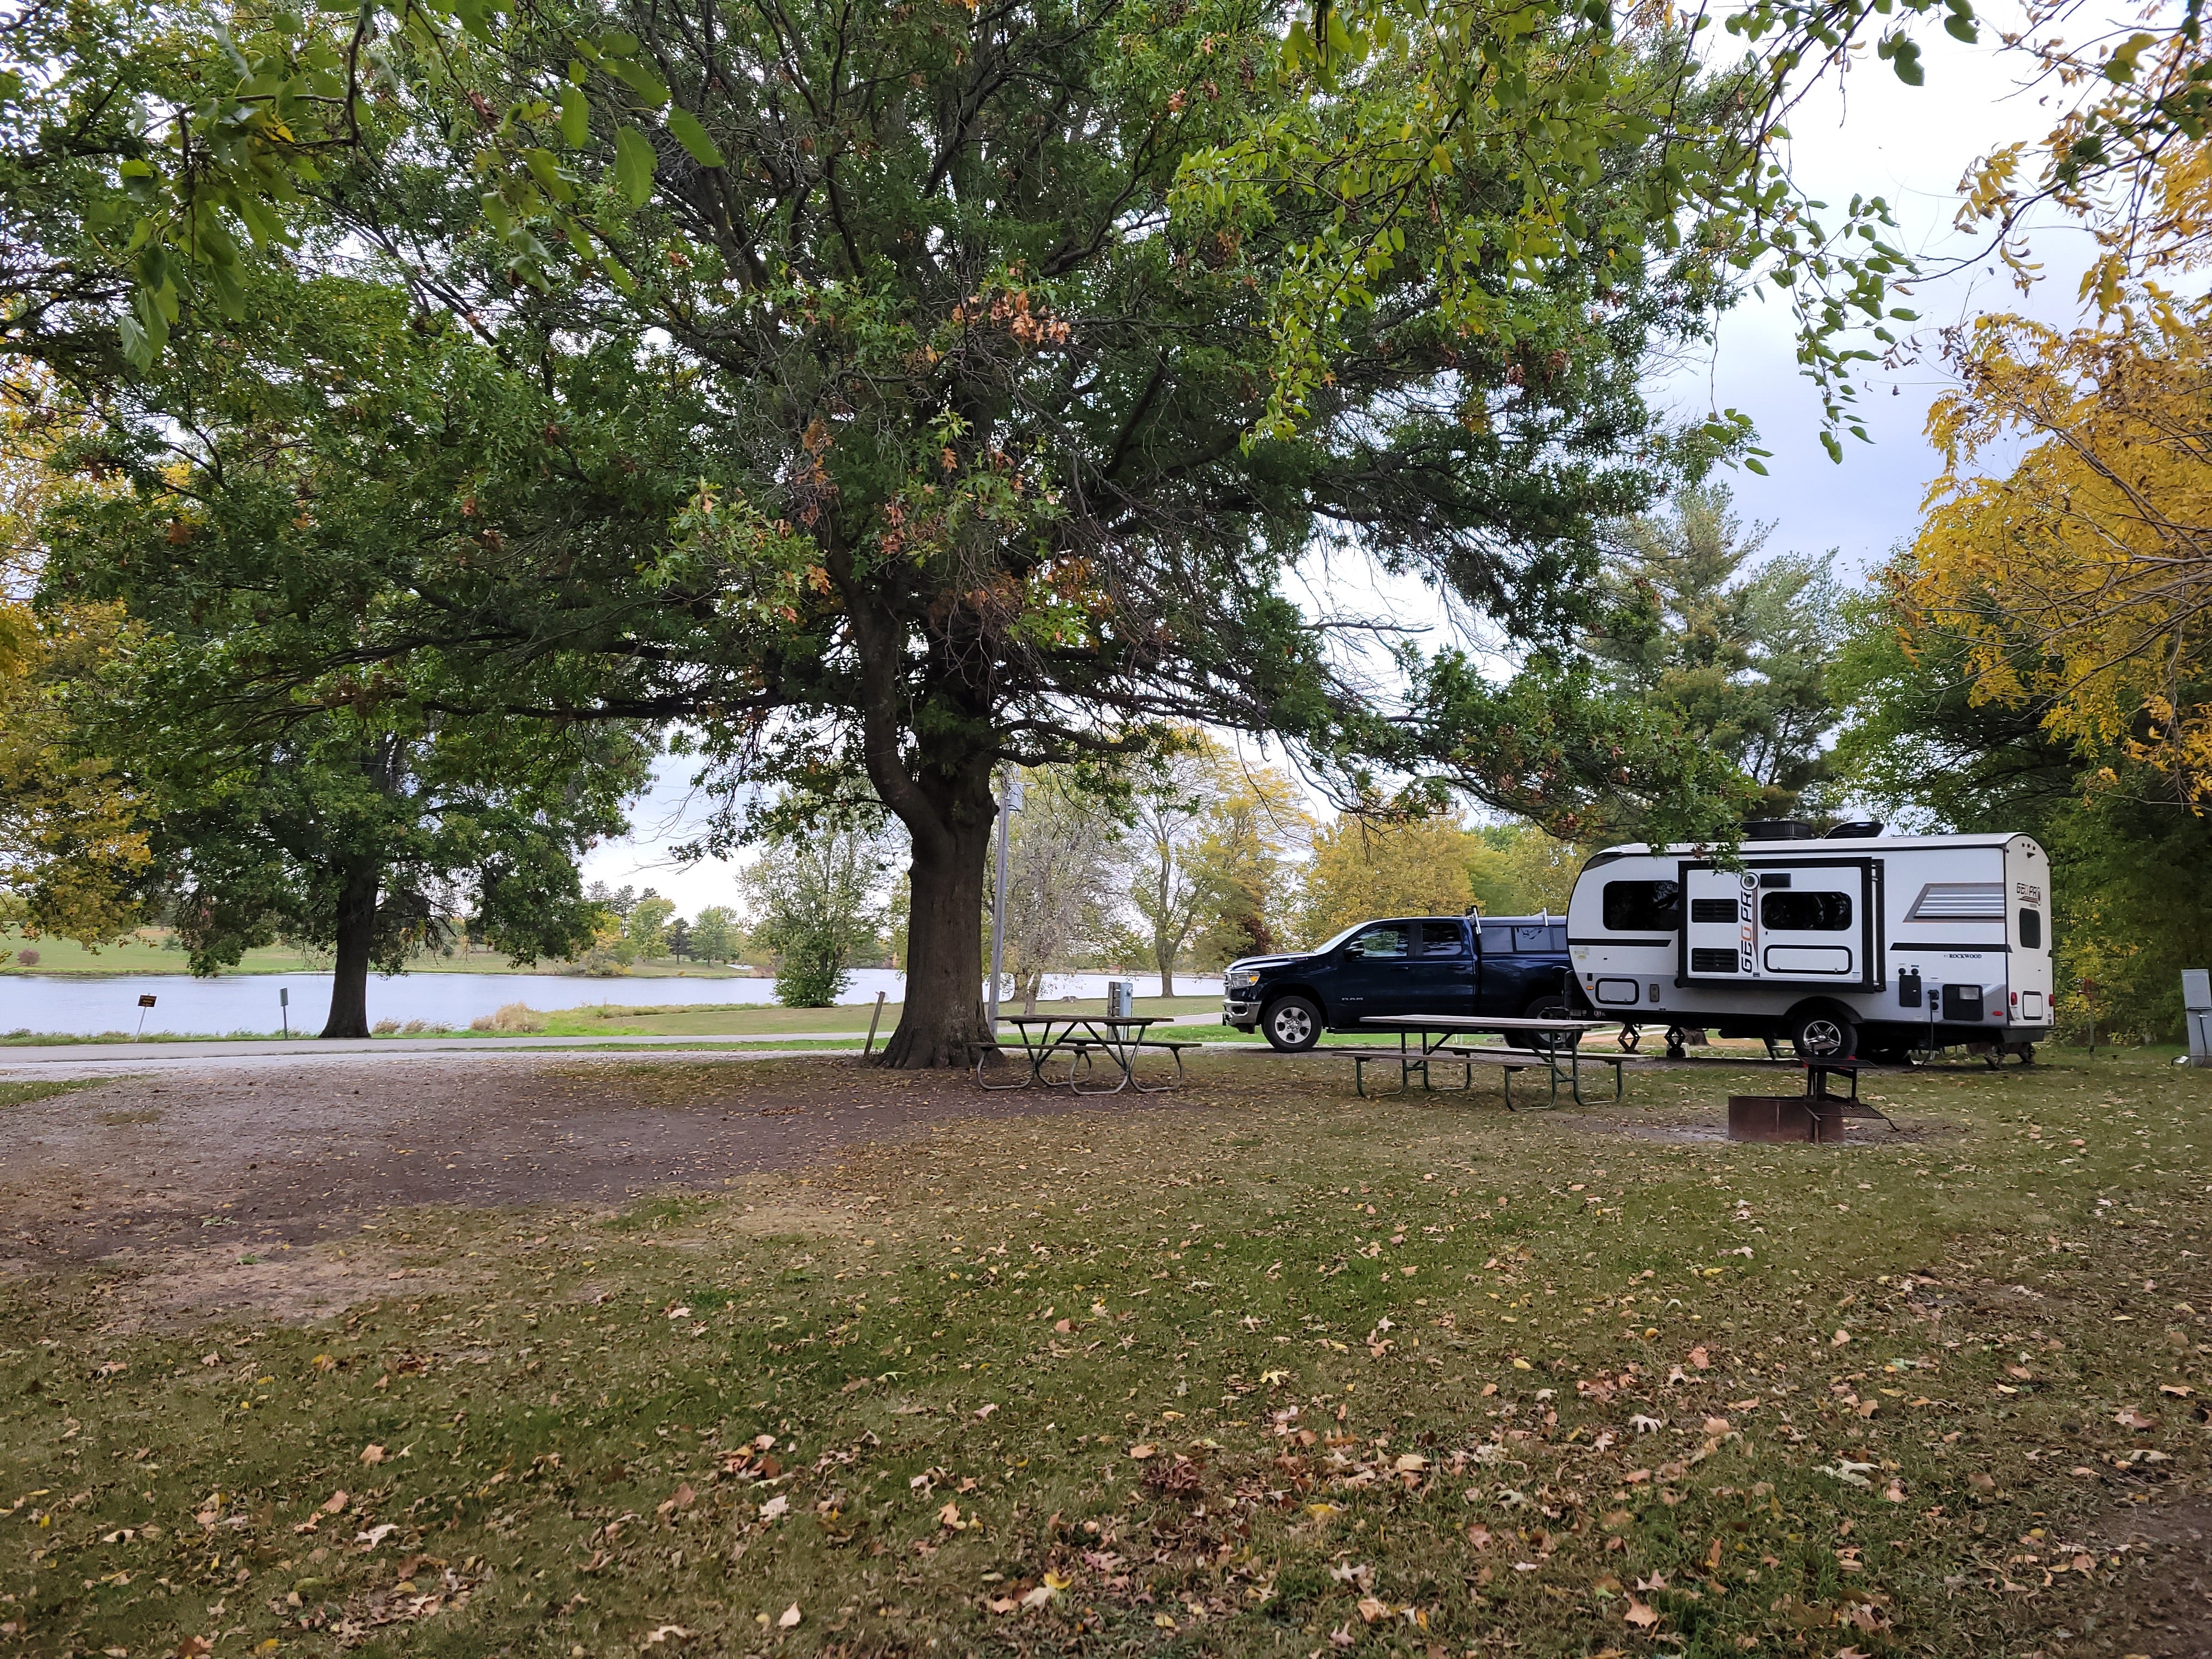 Camper submitted image from Lakeside Co Park - 1